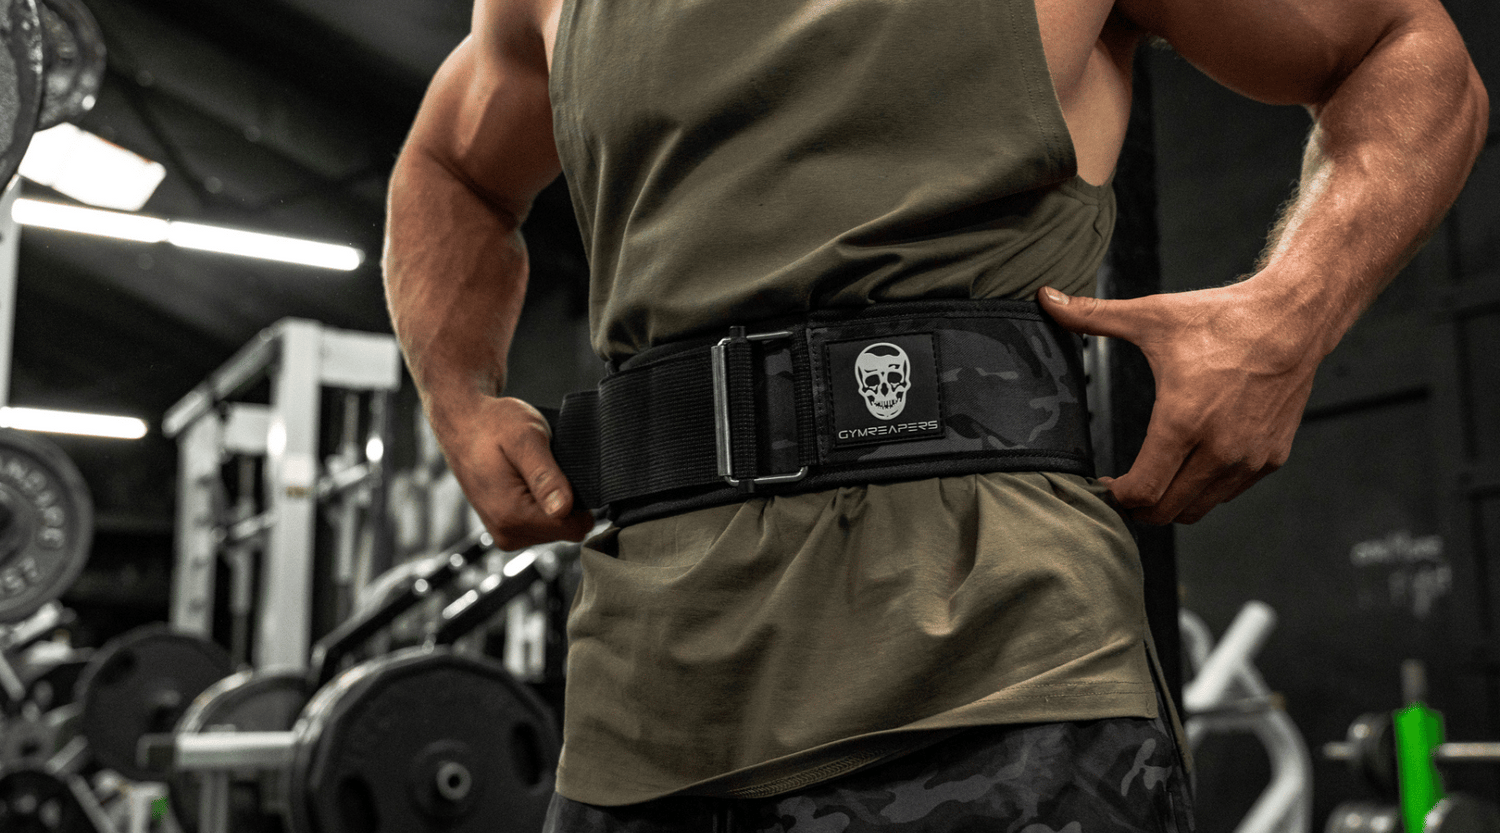 How & When To Use a Weightlifting Belt